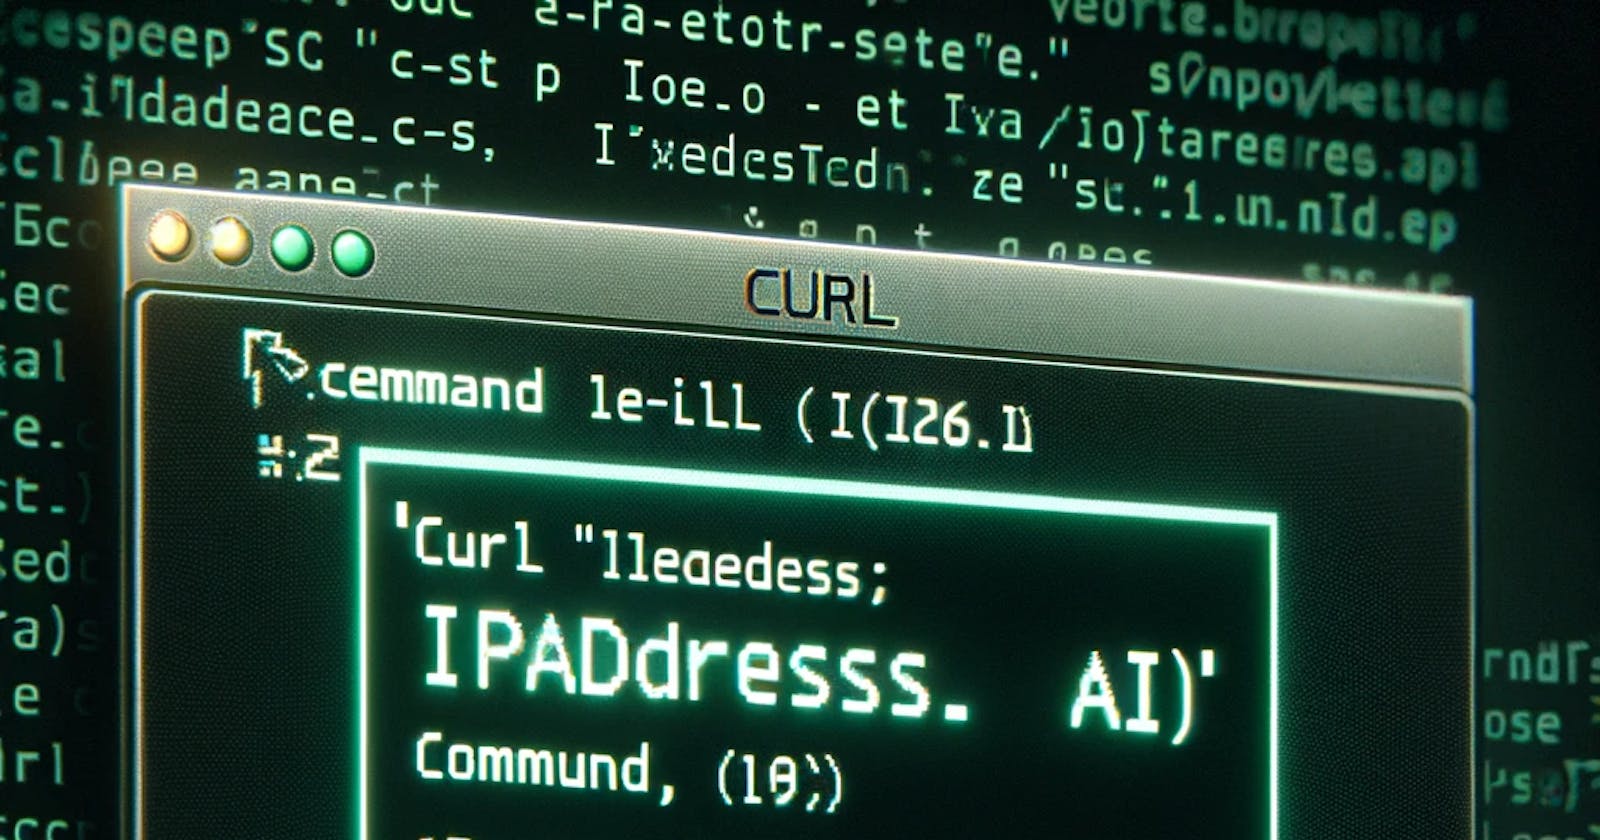 How to use curl to get IP Address information